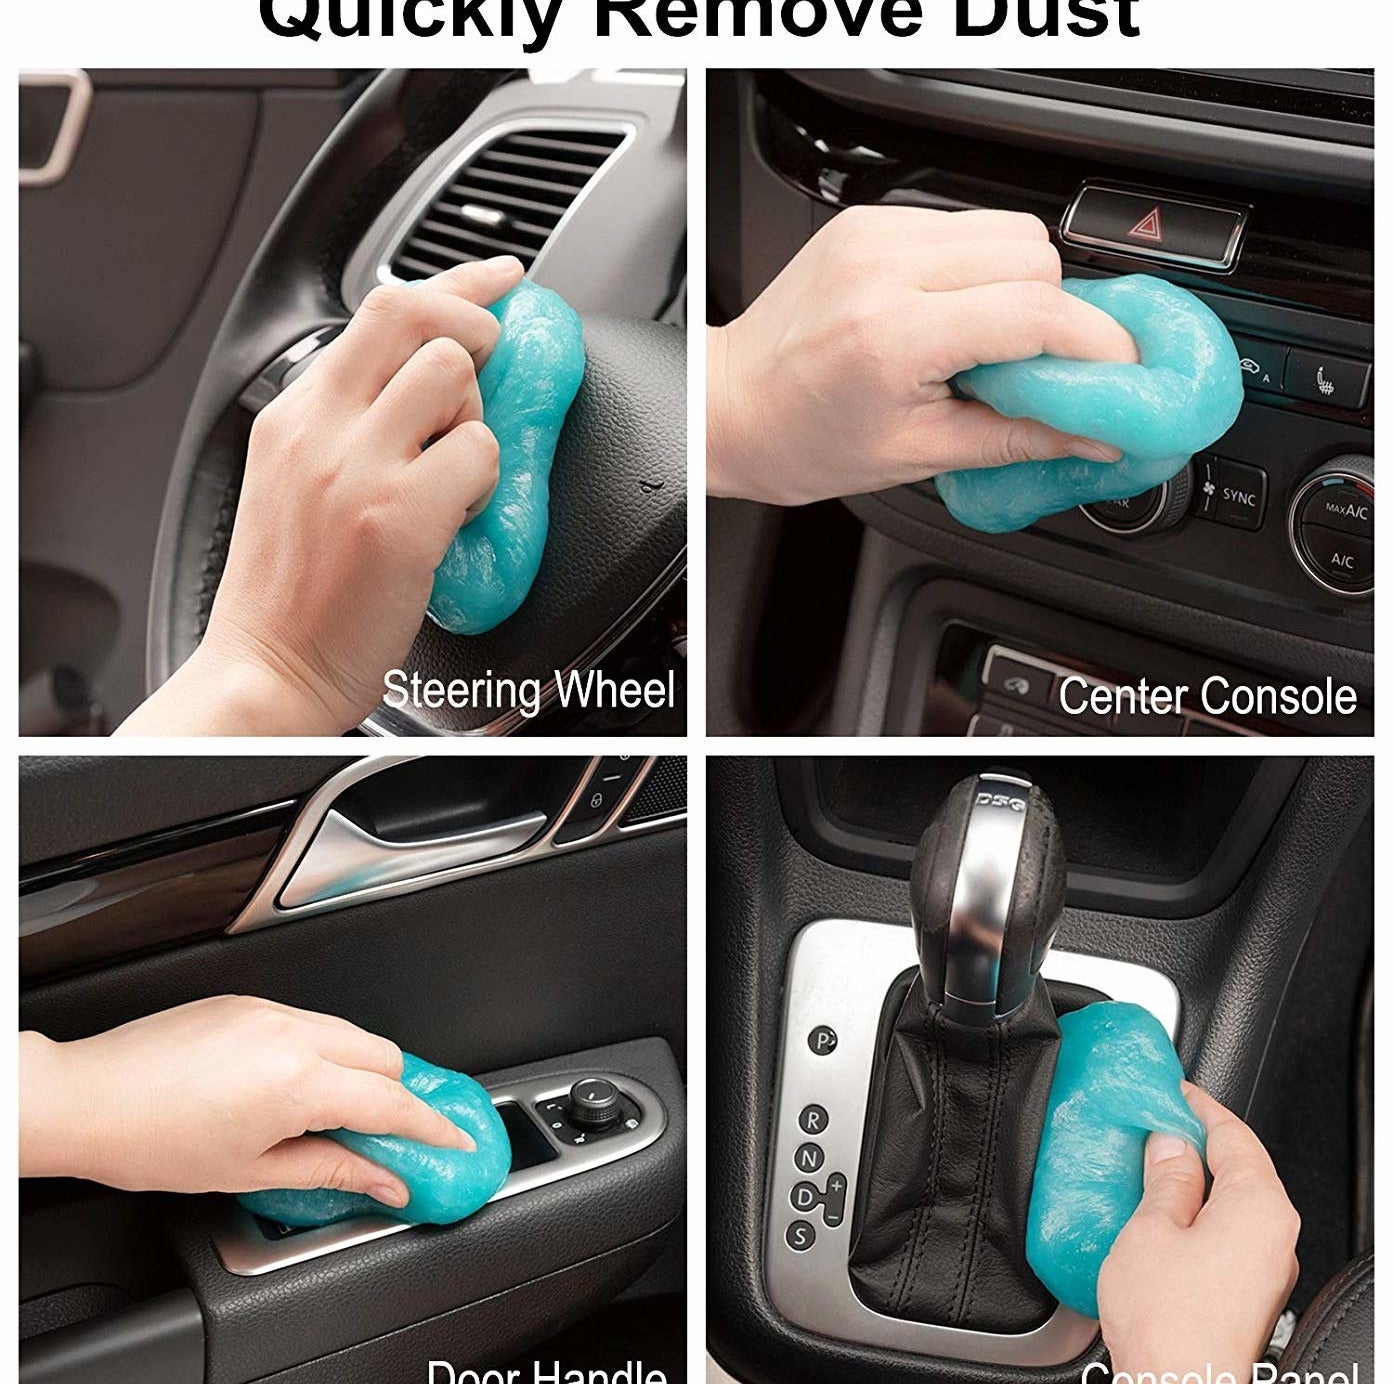 9 Simple Interior Car Cleaning Hacks for a Tight Budget